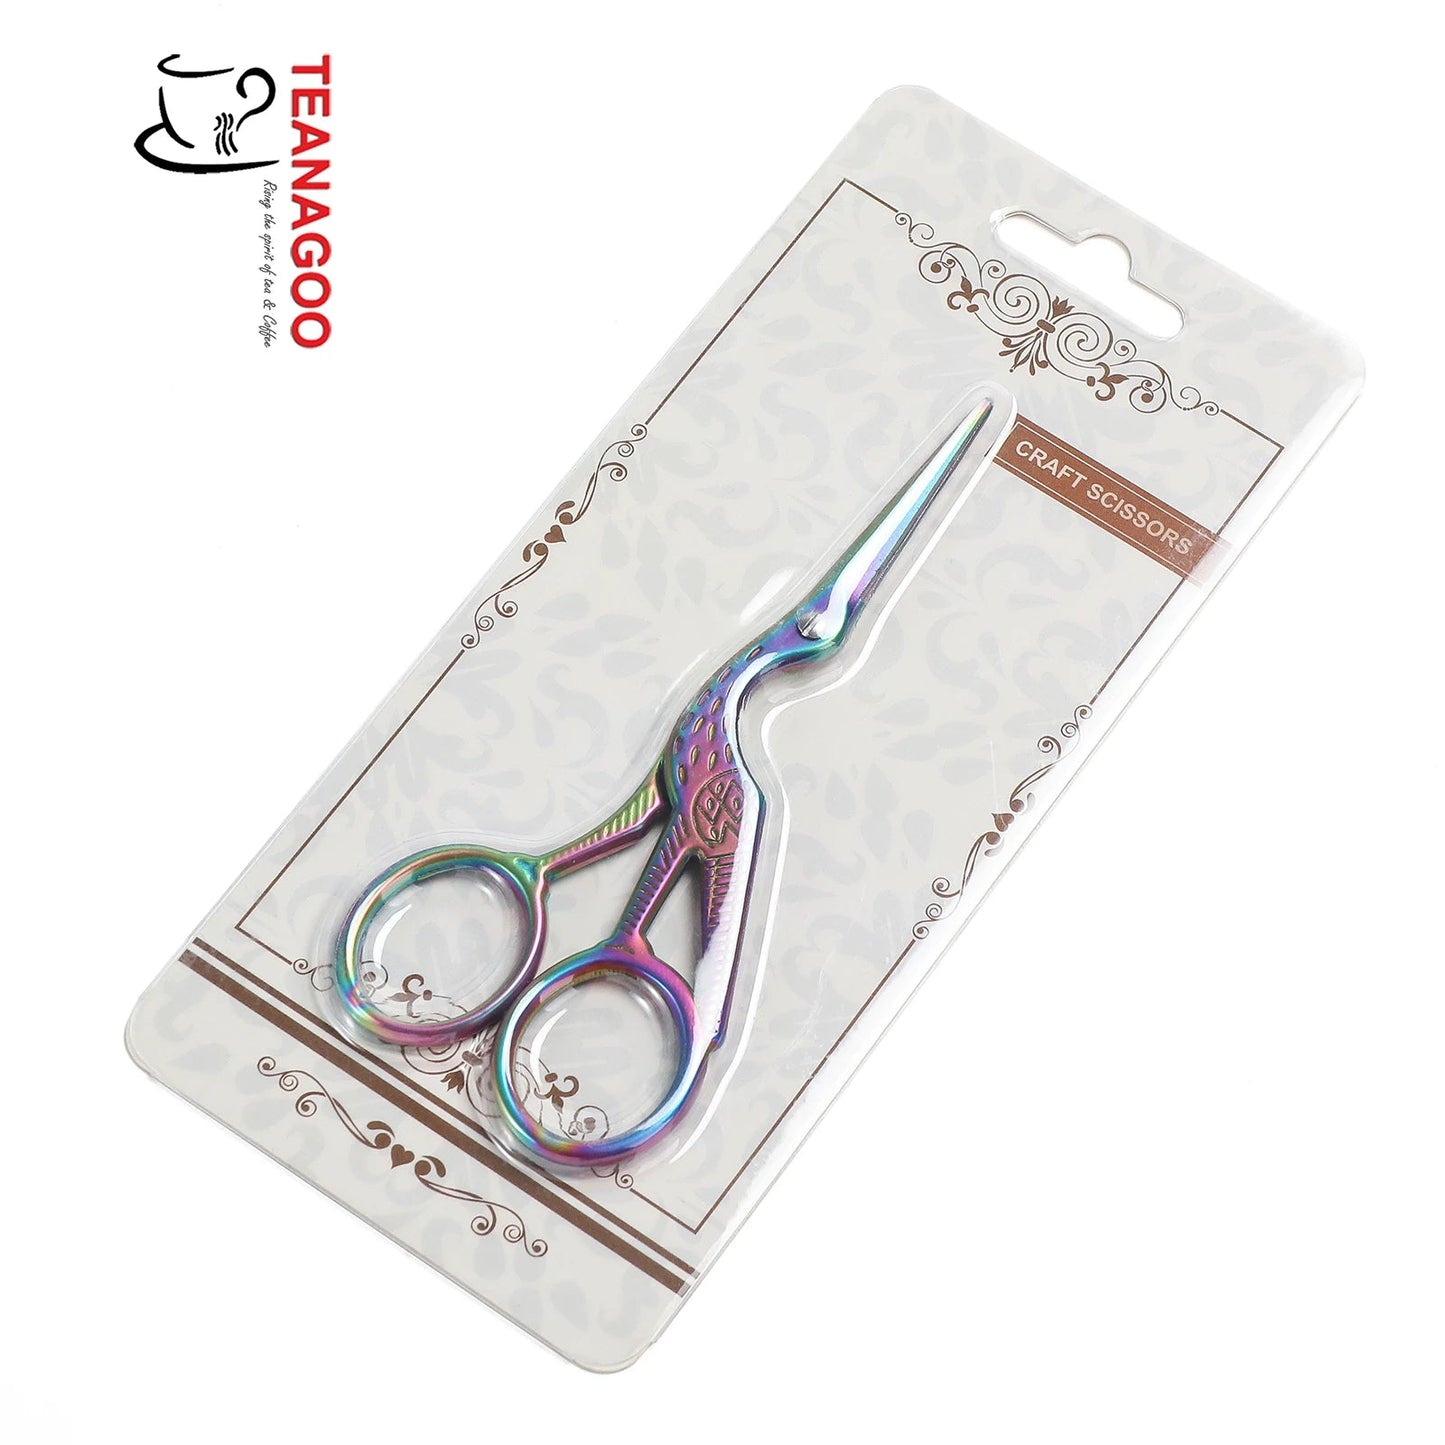 High Quality and Reliable Stainless Steel Scissors for home office and tearoom